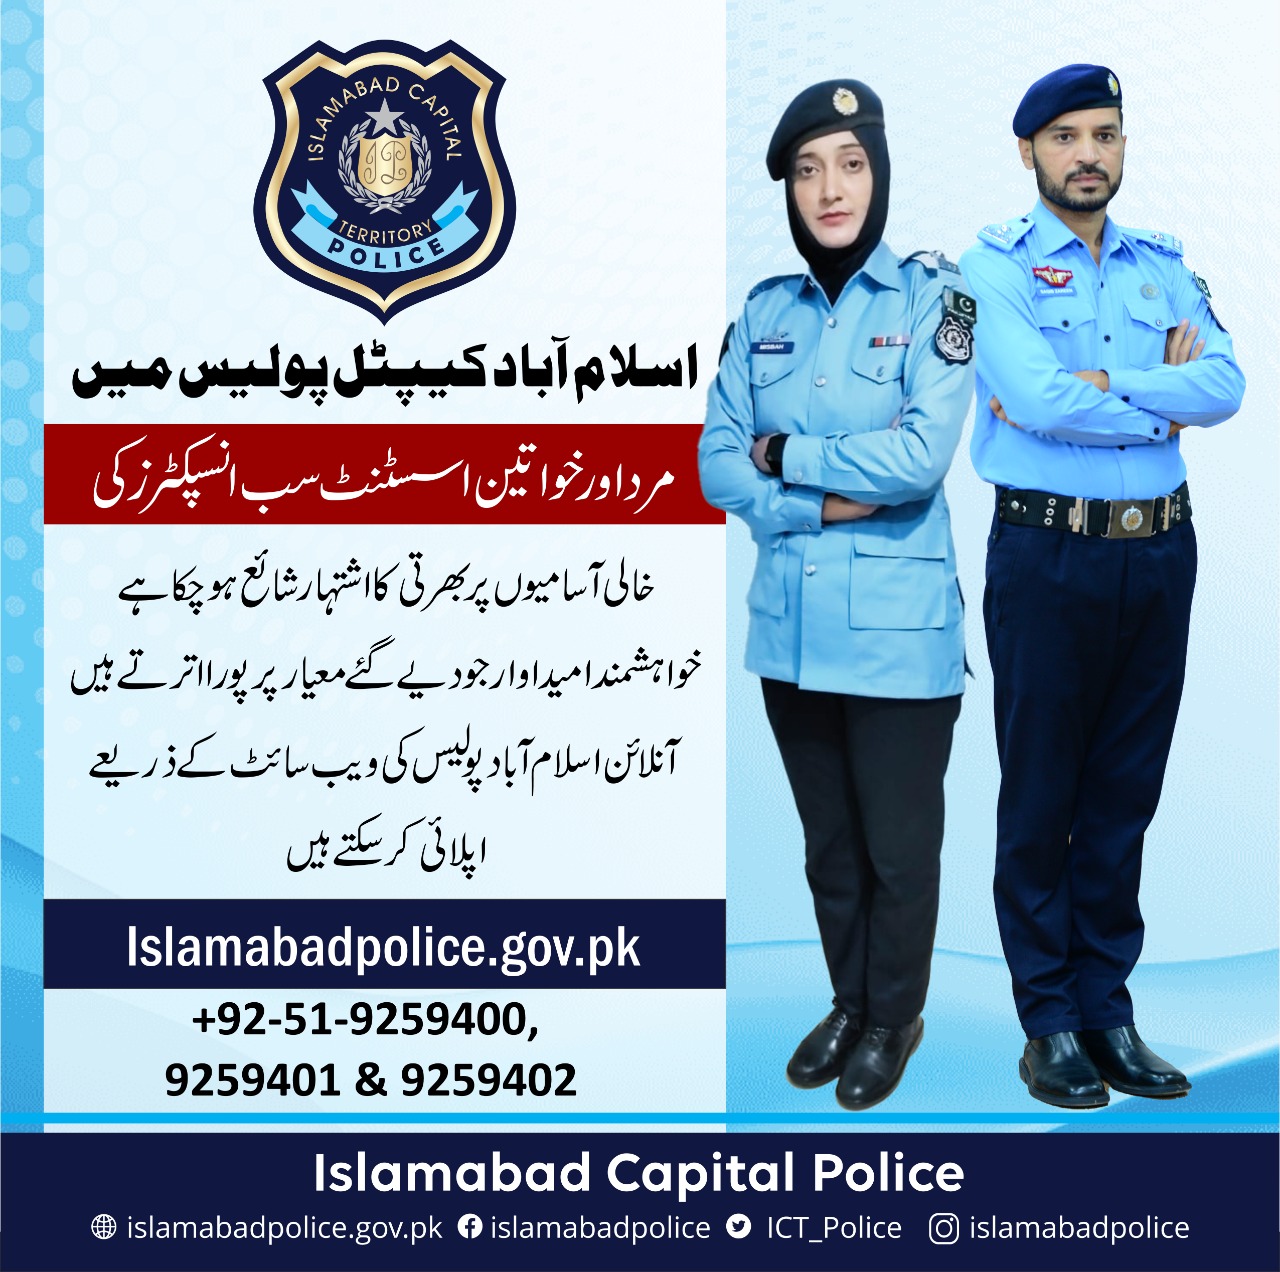 Jobs in Islamabad Police as Assistant Sub inspector male and female, police jobs, ict jobs, ASI jobs, sub inspector jobs in Islamabad, government jobs